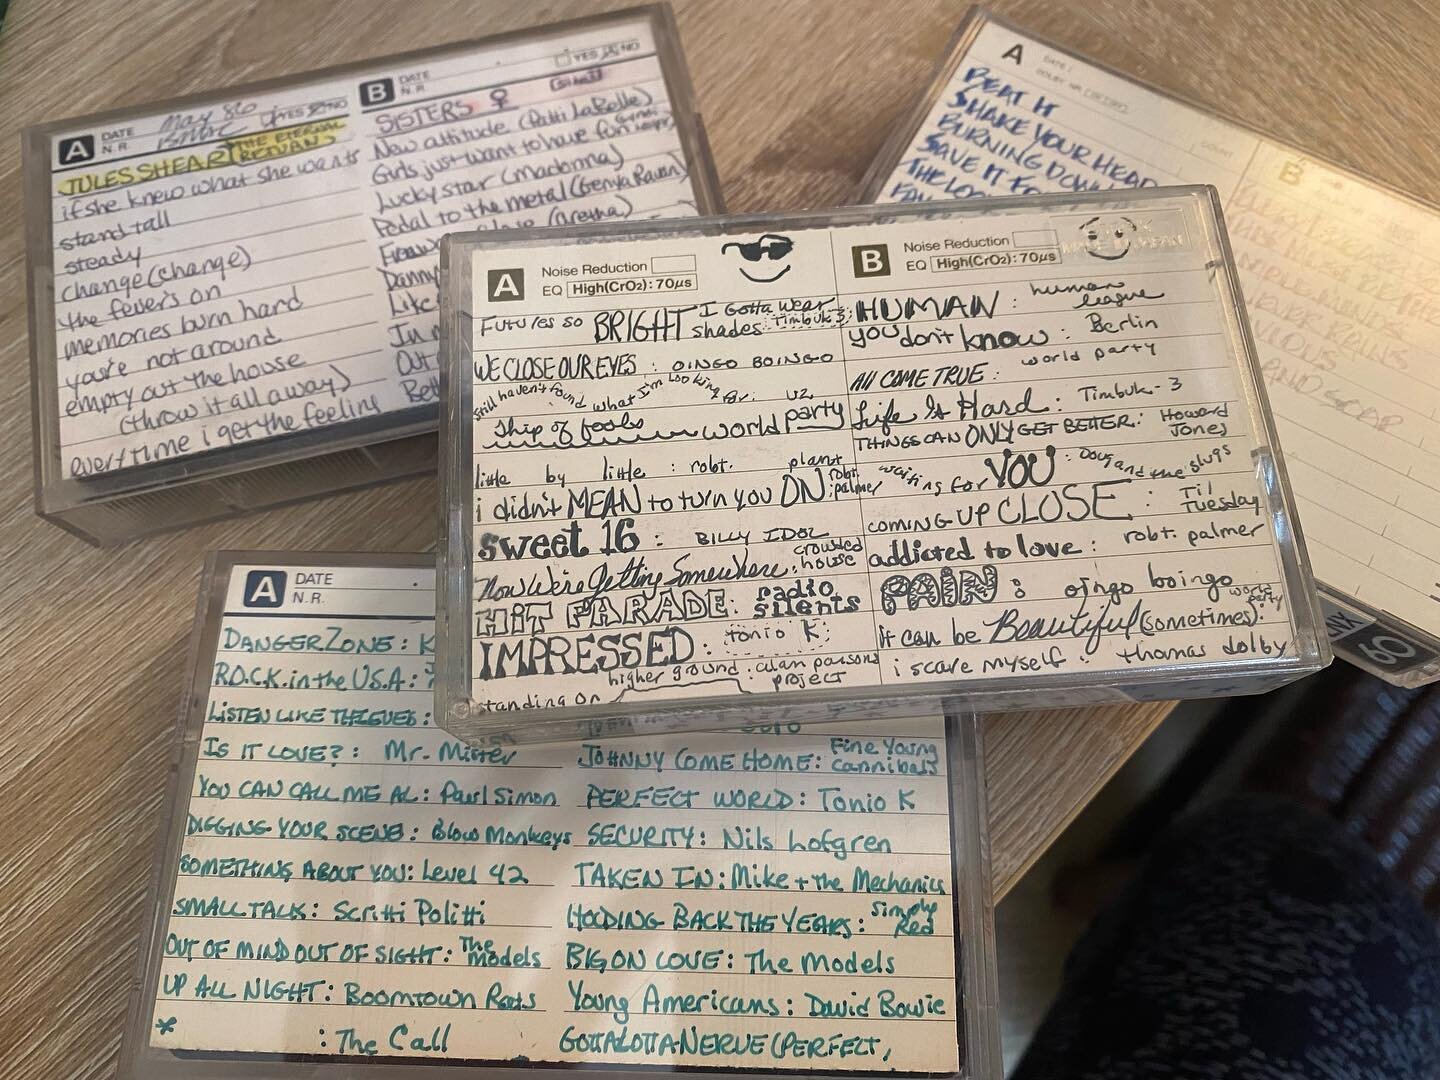 Listening to @lizprato talk about GenX and her book KIDS IN AMERICA inspired me to look for these old mix tapes that my dear friend @bonniemacaskill made for me back in the day. I was in the late edges of Boomer and too early for GenX but I was prett